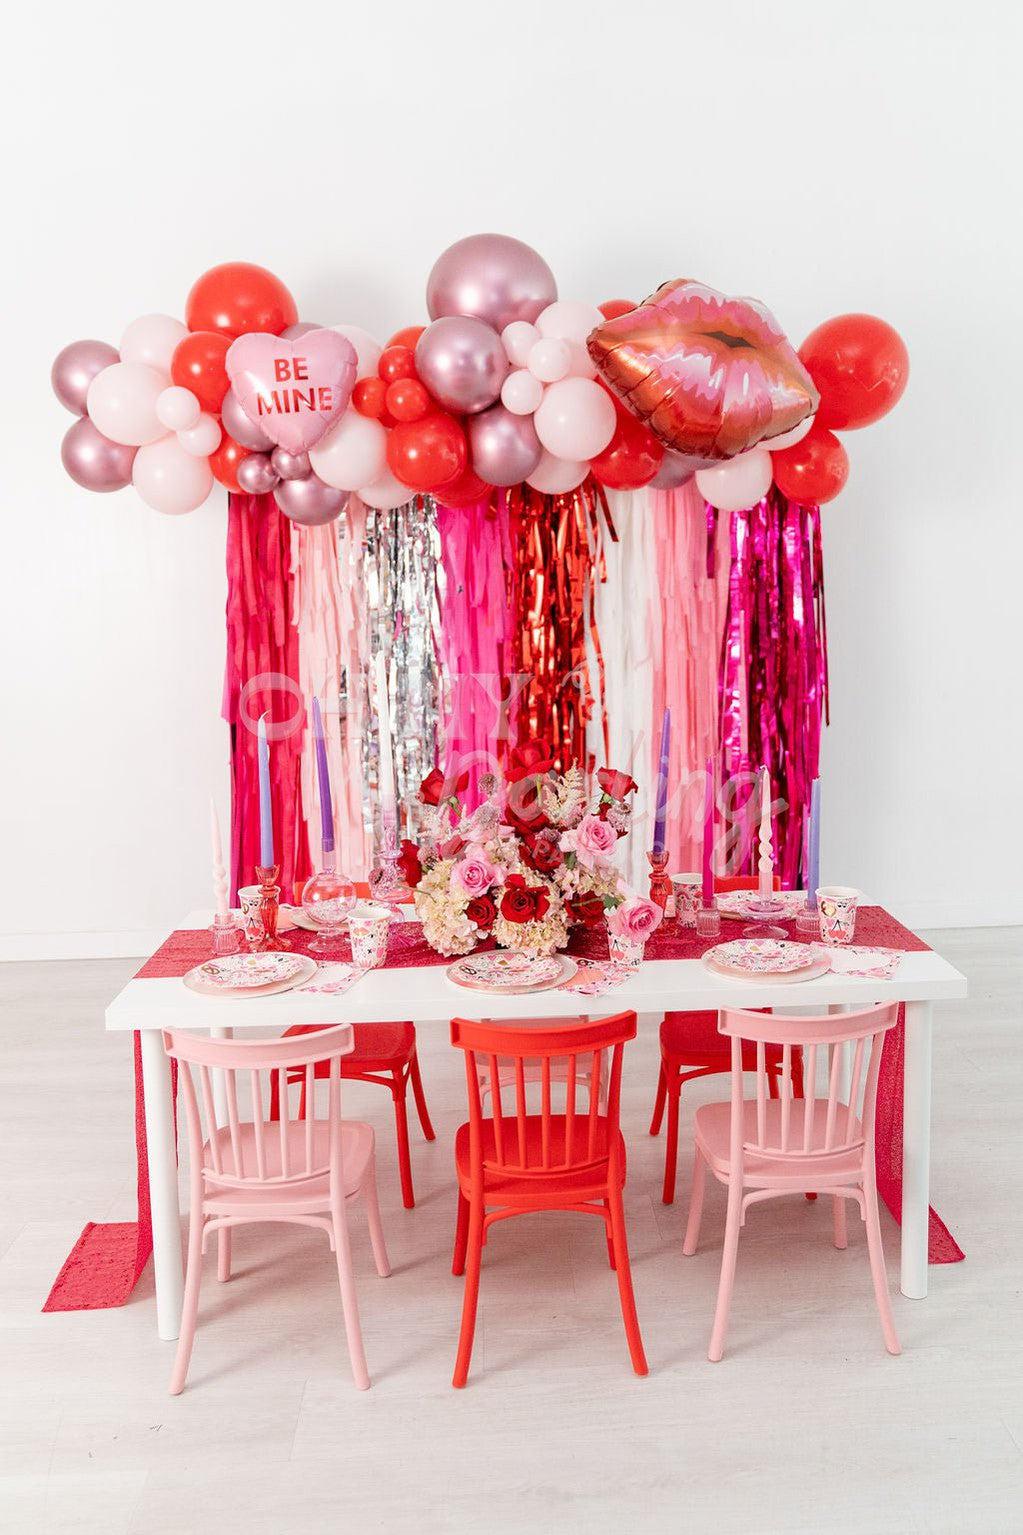 Game of Love Backdrop-Fringe Backdrop-Party Decor-Oh My Darling Party Co-Oh My Darling Party Co-baby pink, bachelorette, backdrops for party, balloon garlands, be my valentine, blush, candy pink, christmas eve, default, fringe garland, Fringe Streamers, galentines, girl party, iridescent, metallic red, OMDPC, party backdrops, Pink, pink bachelorette, PINK BACKDROP, pink balloons, pink purple party, premium, red, red and pink, Red and White, RED BACKDROP, tassels, valentines, valentines day, valentines day p